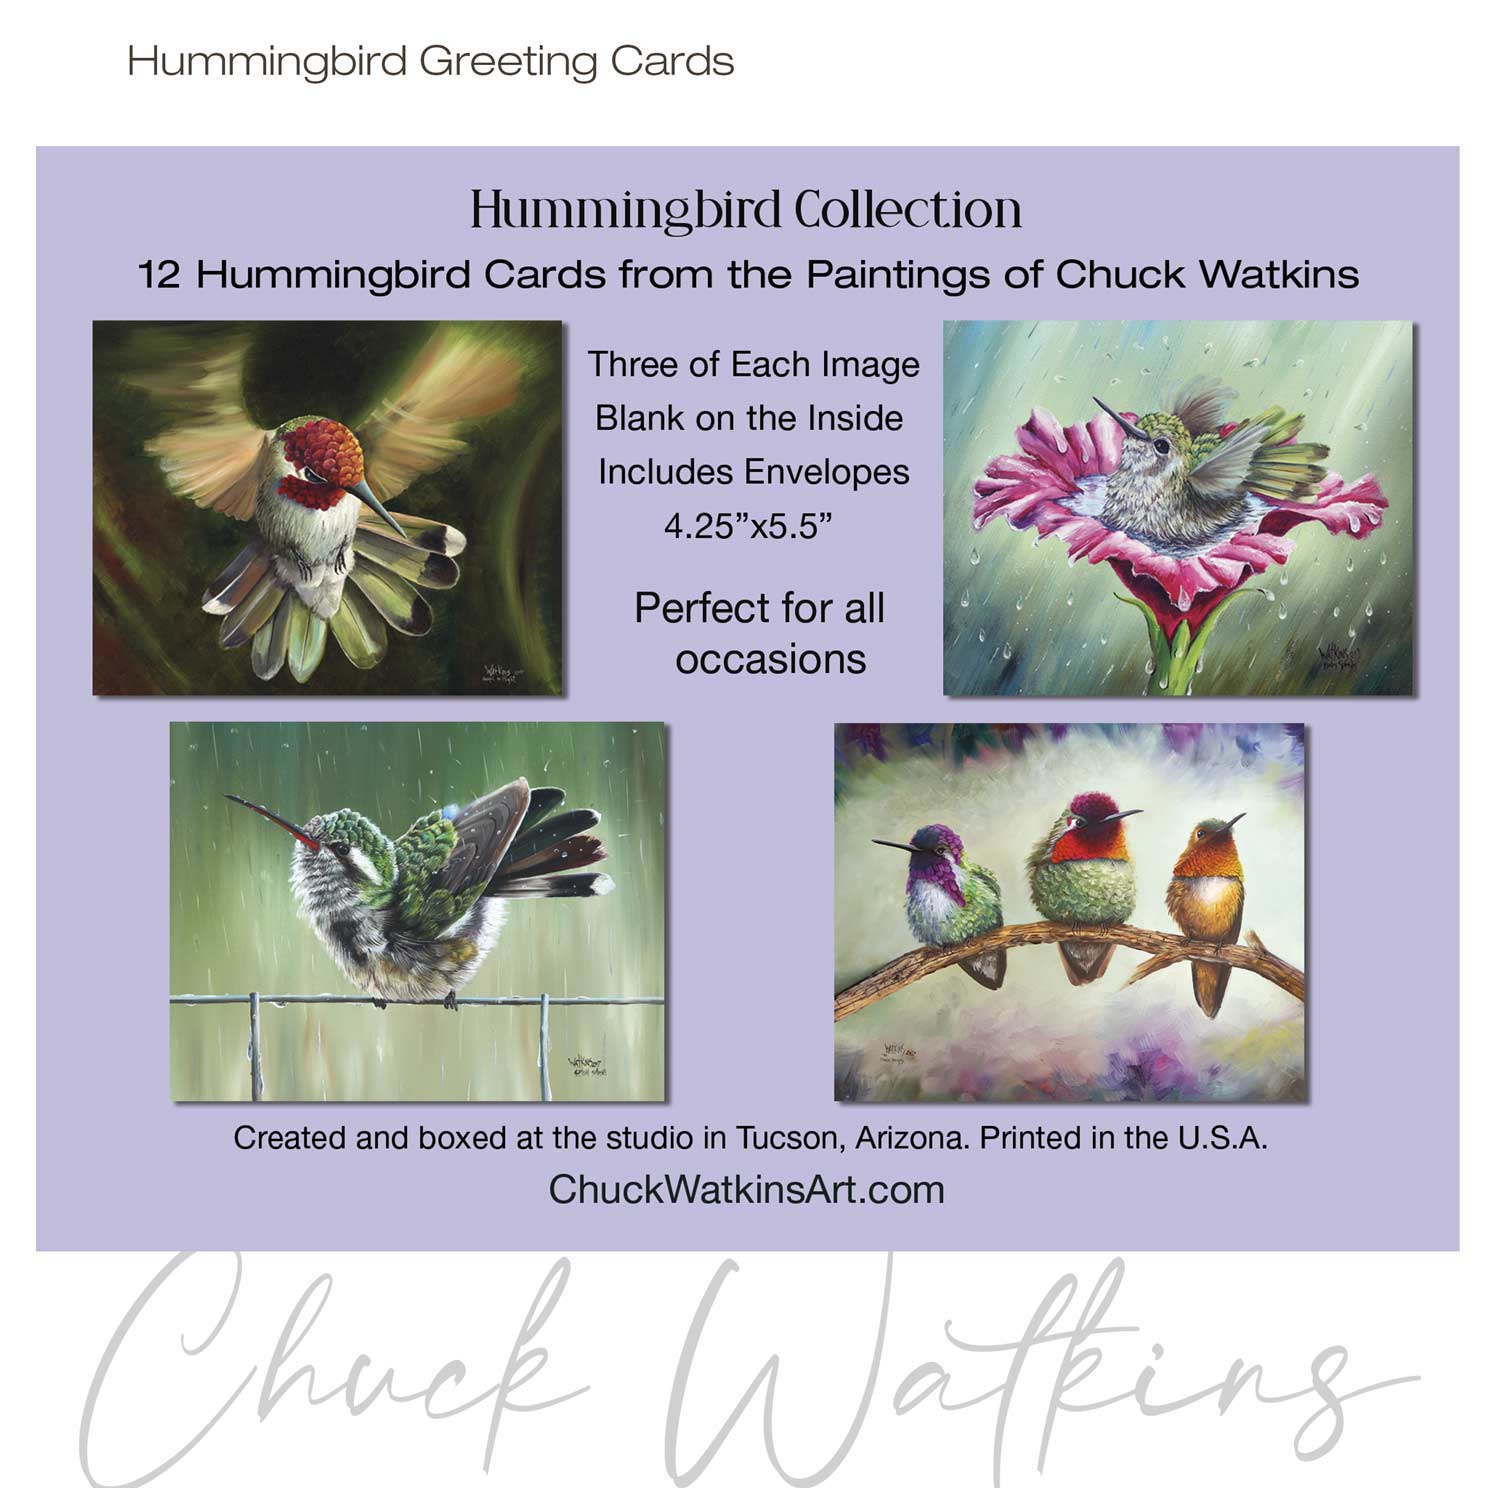 The Hummingbird Collection Greeting Cards